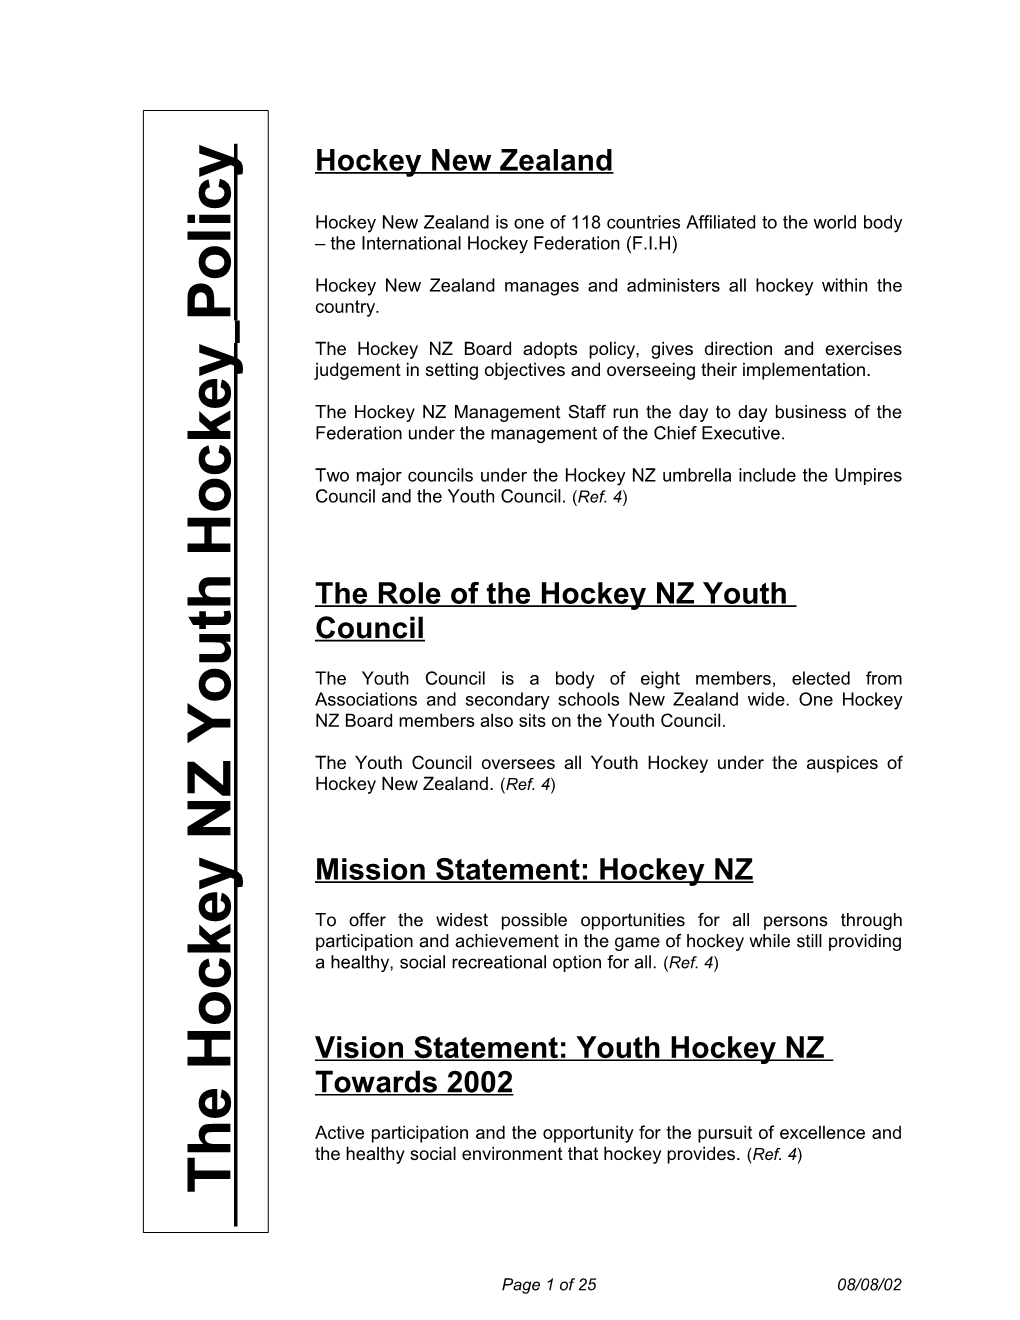 Hockey New Zealand Manages Andadministers All Hockey Within the Country